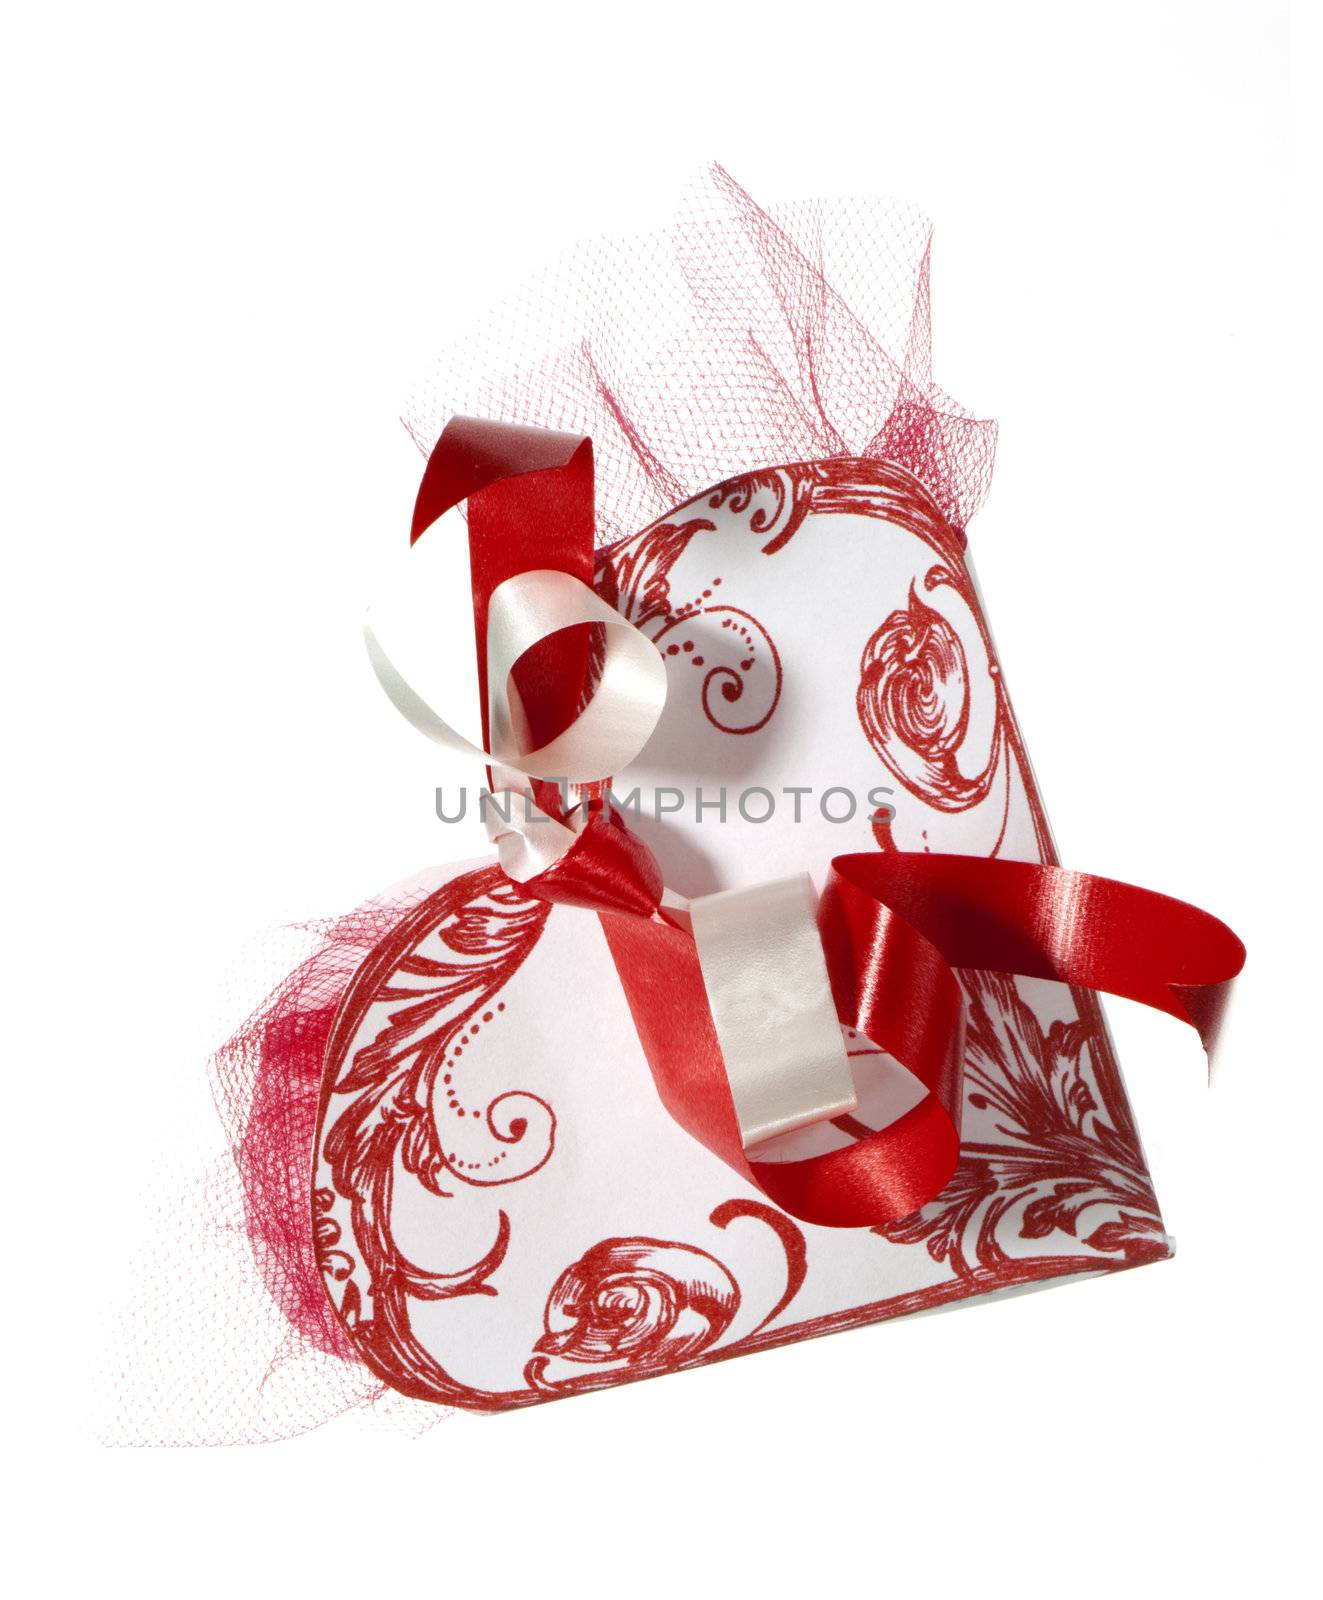 small gift box for all celebrations and events